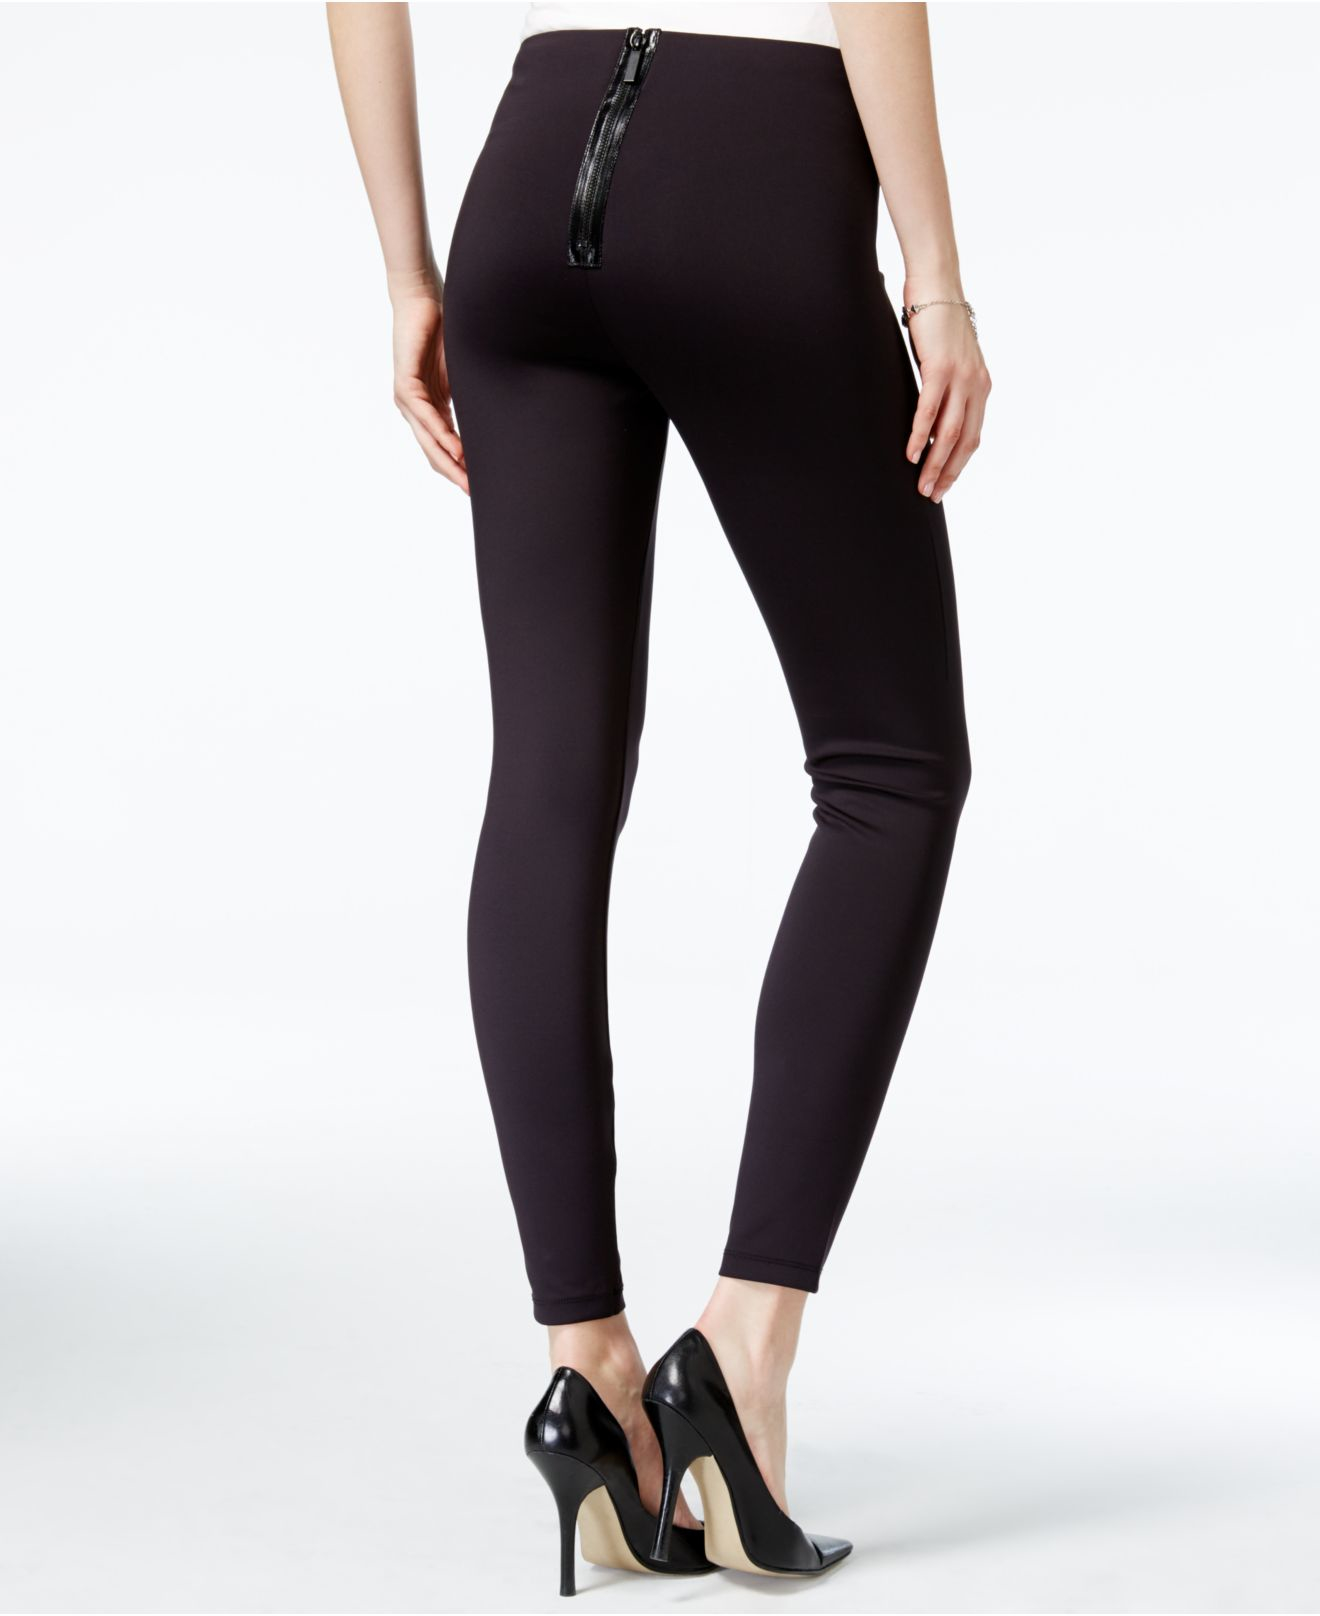 help identifying these cropped leggings? there's a zipper pocket